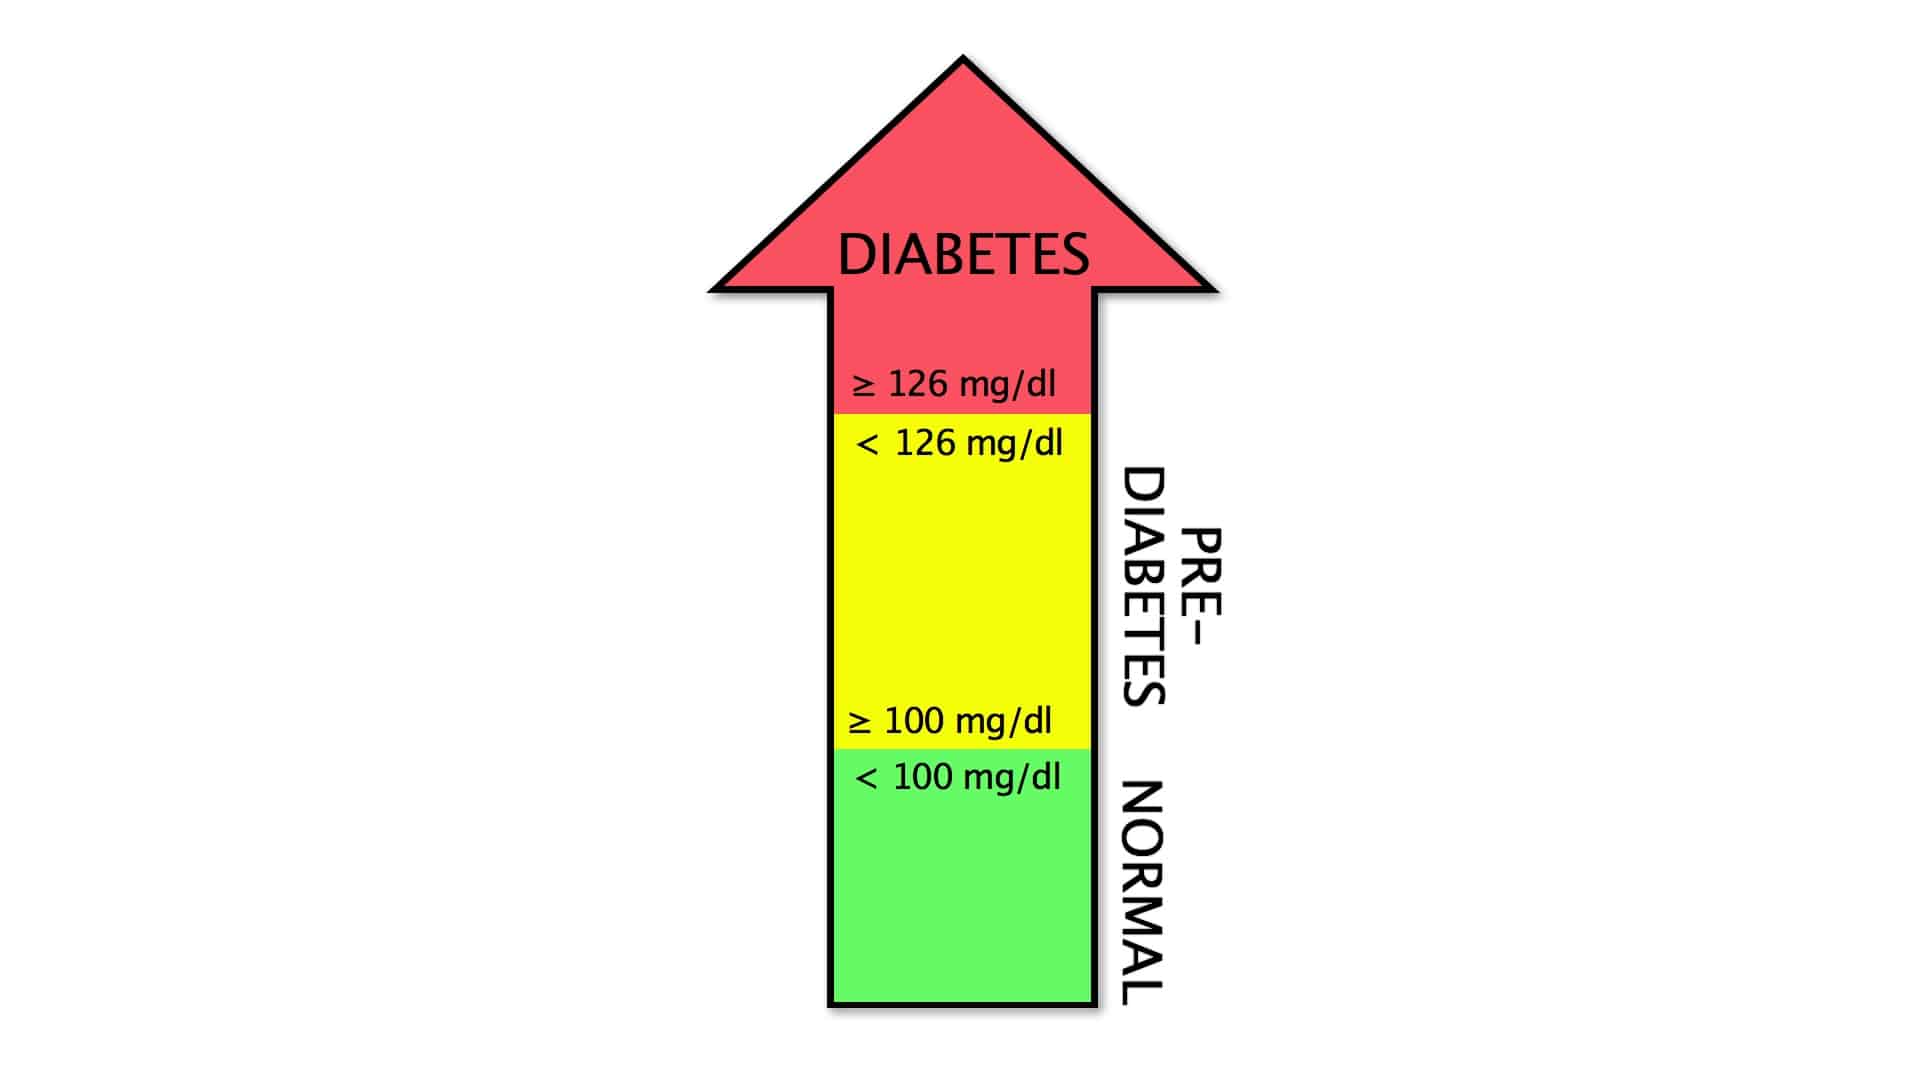 Lifestyle Medicine Is the Standard of Care for Prediabetes